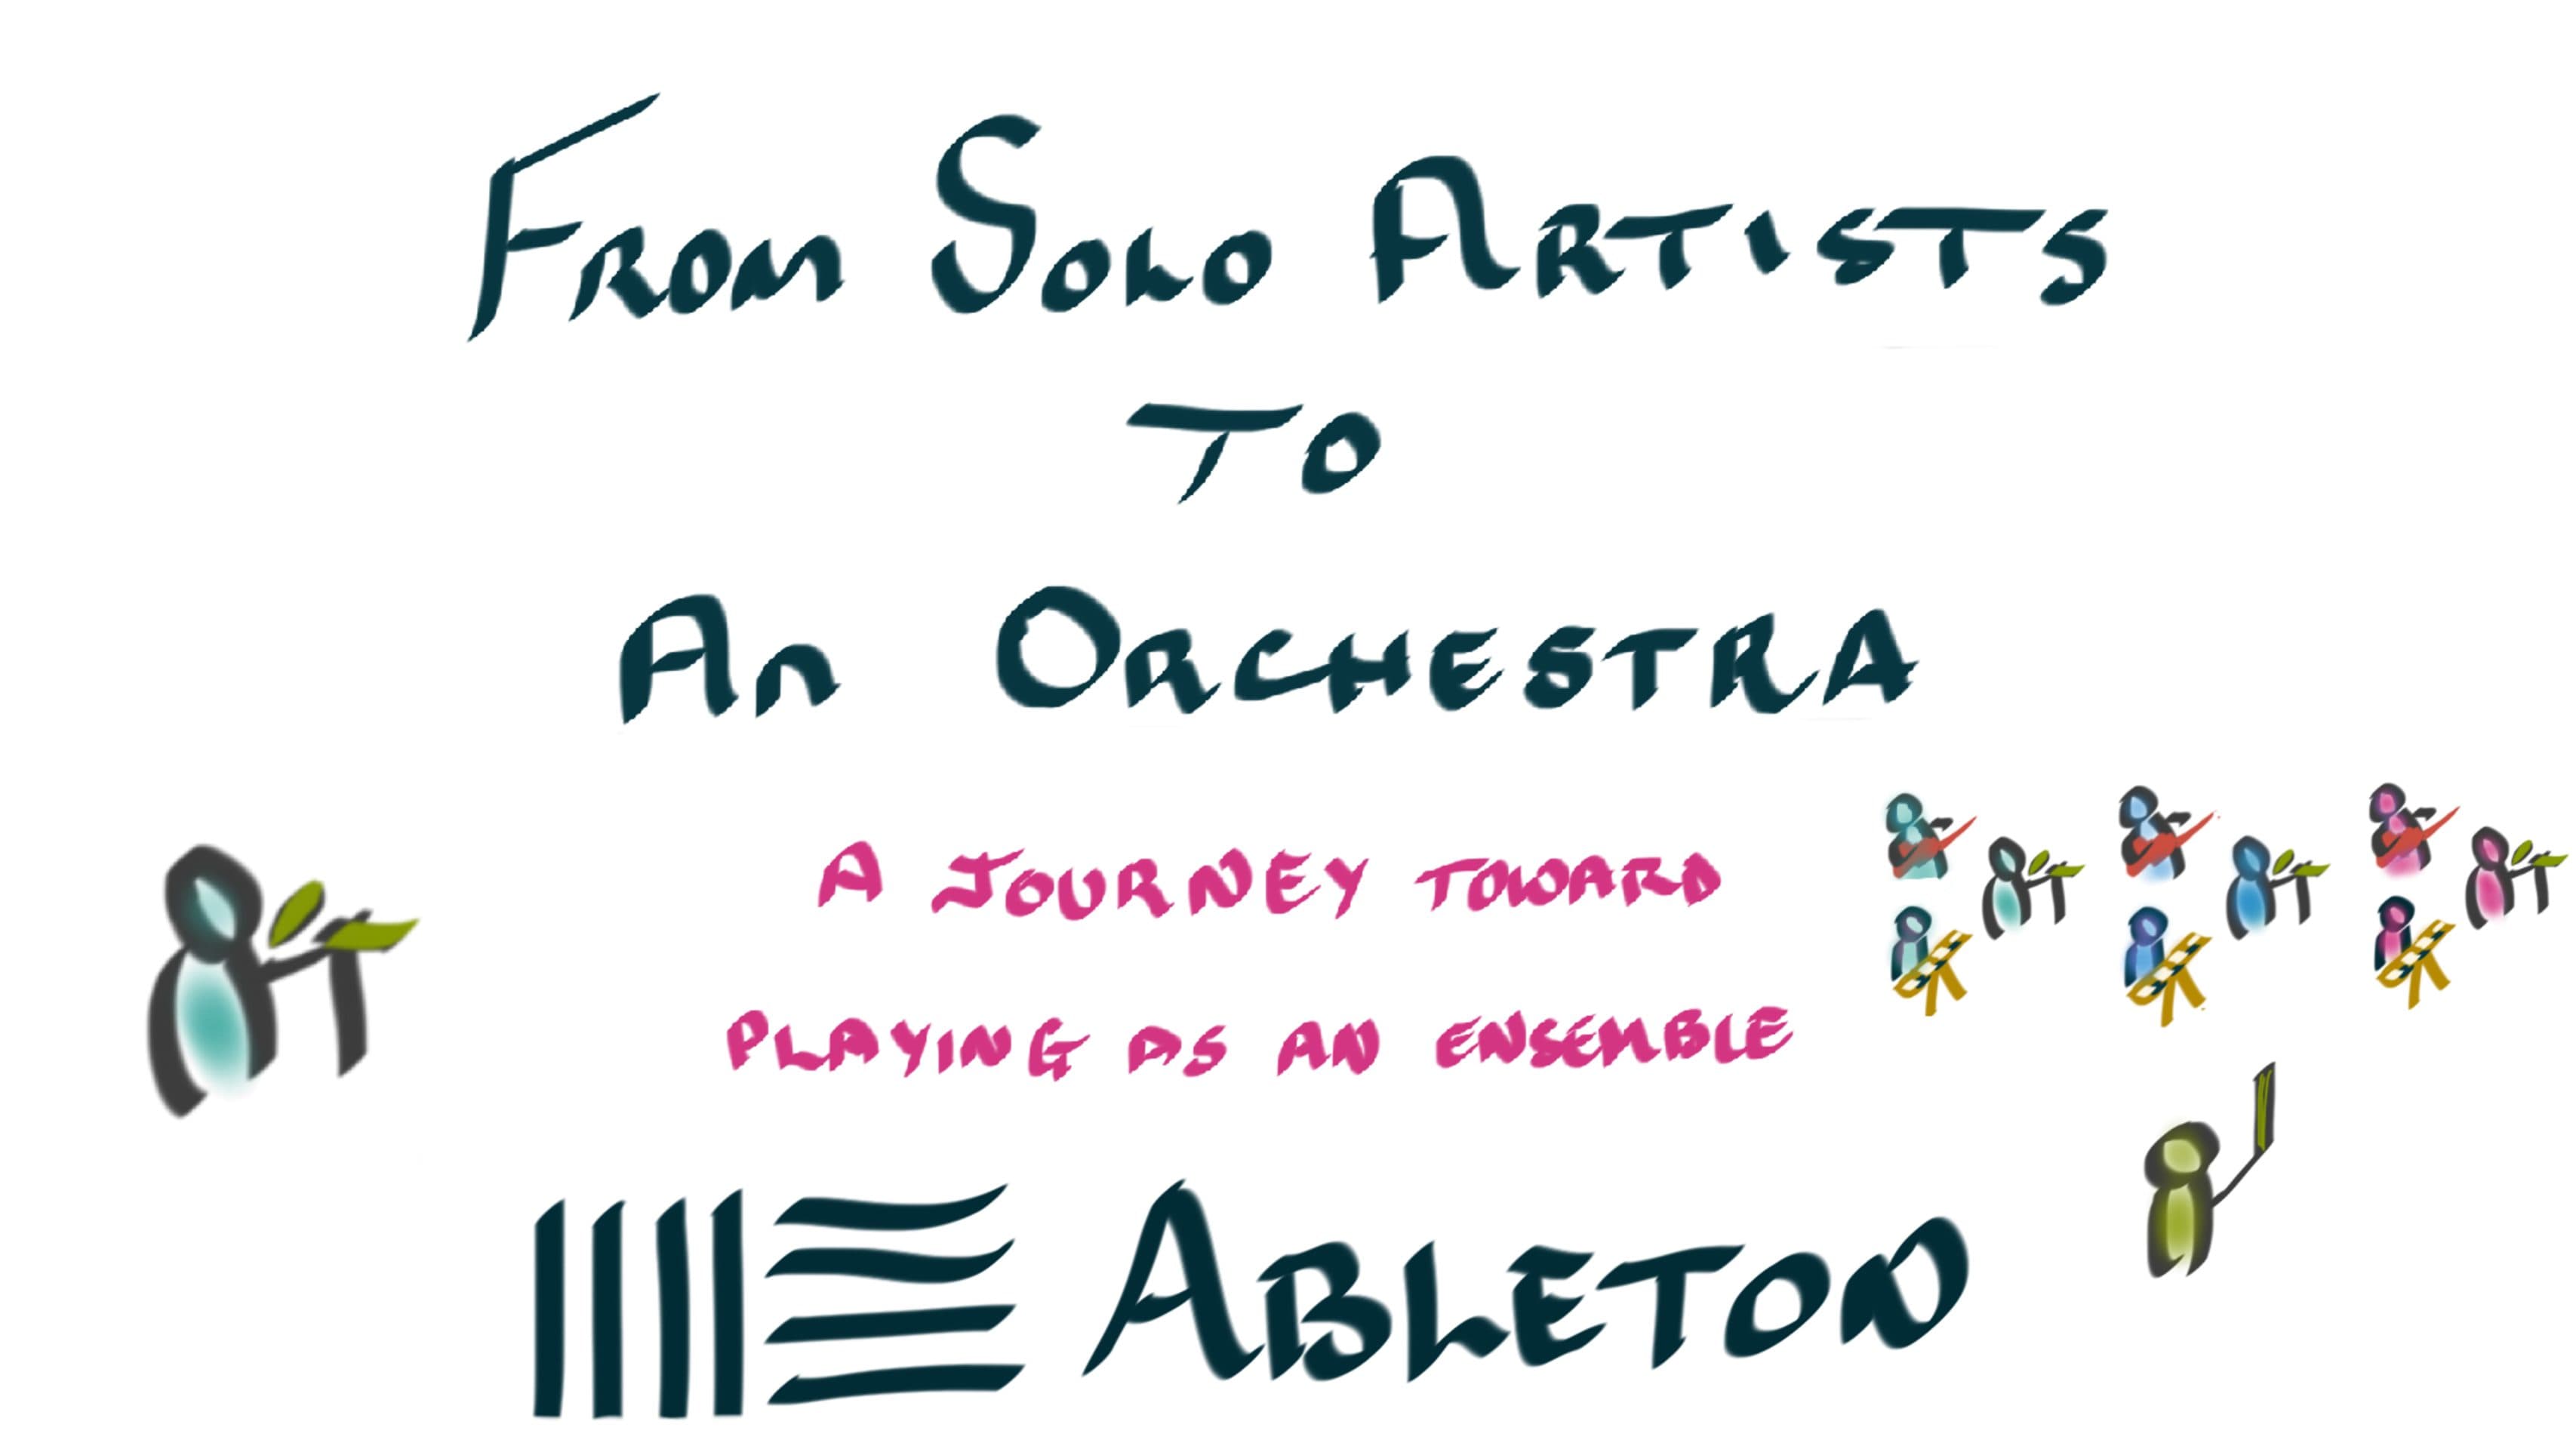 From solo artists to an orchestra; a journey toward playing as an ensemble